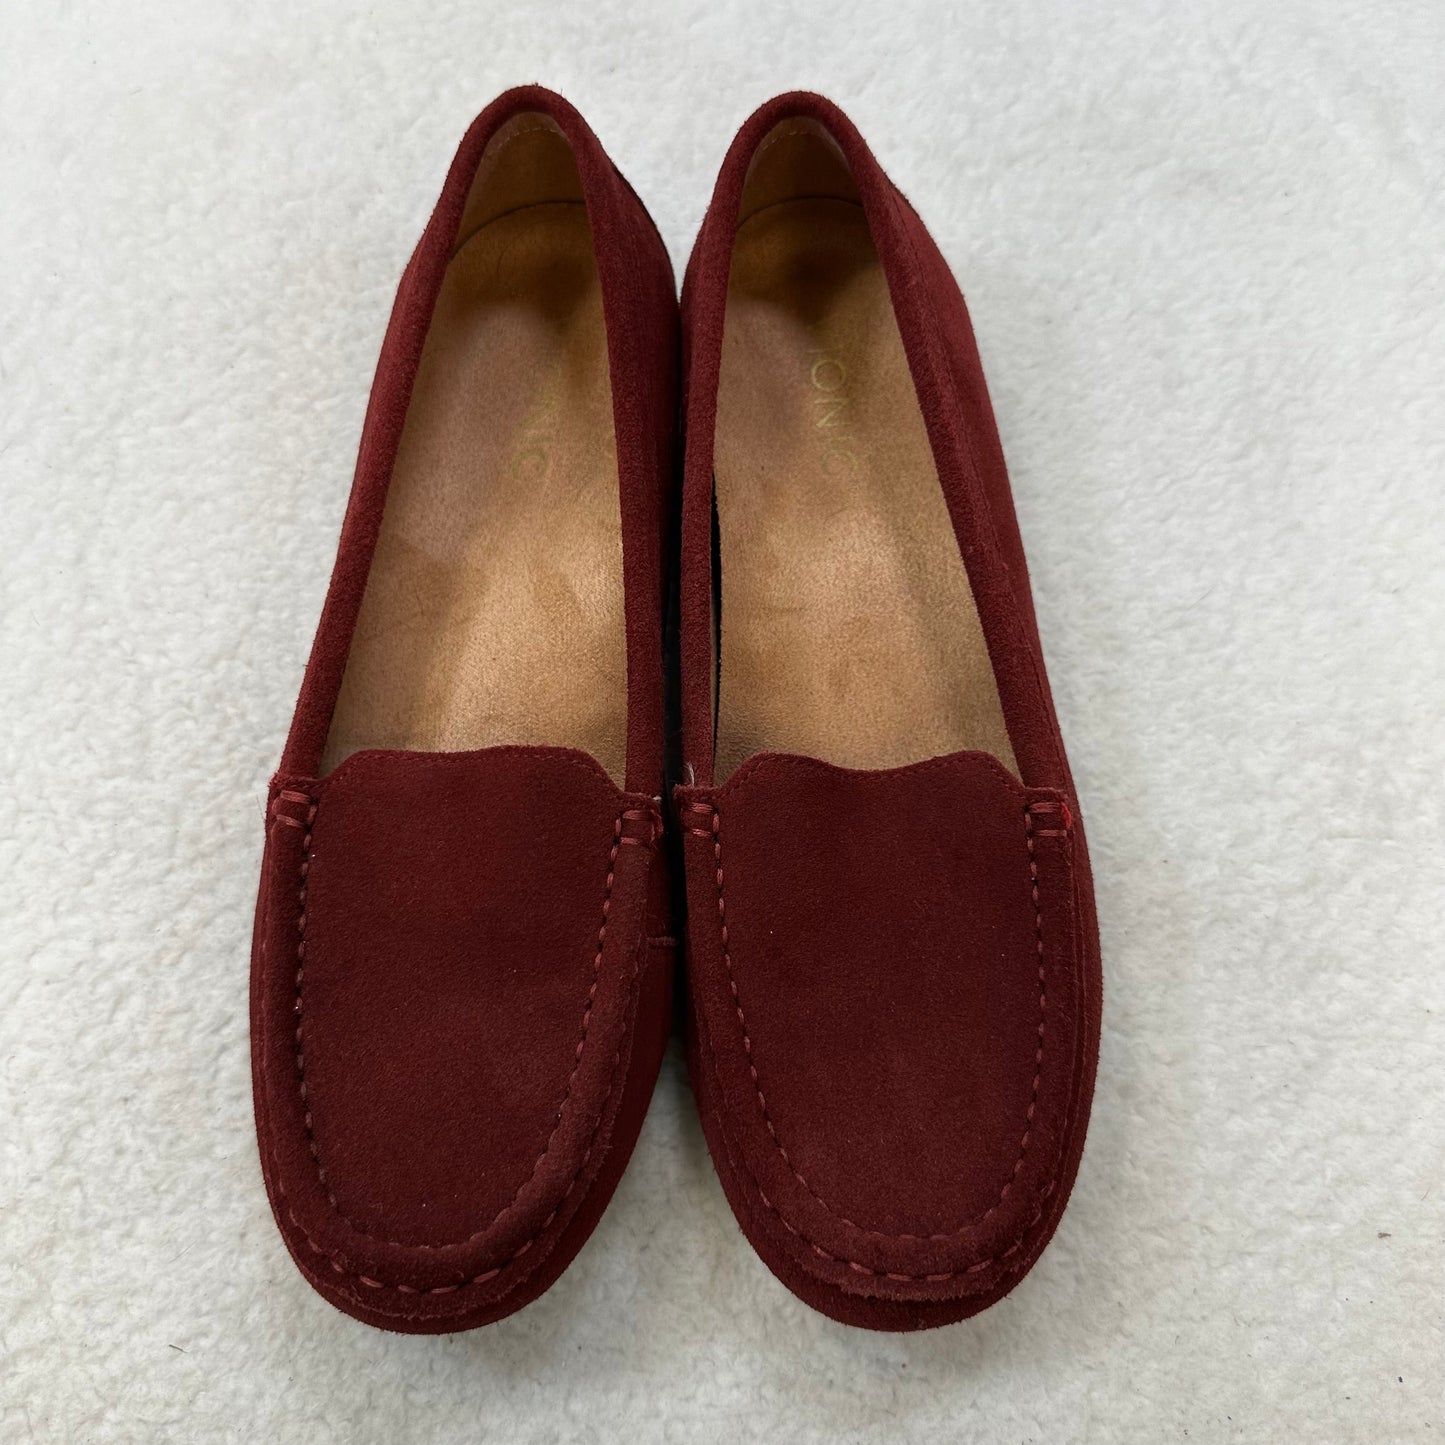 Wine Shoes Flats Loafer Oxford Vionic, Size 8.5